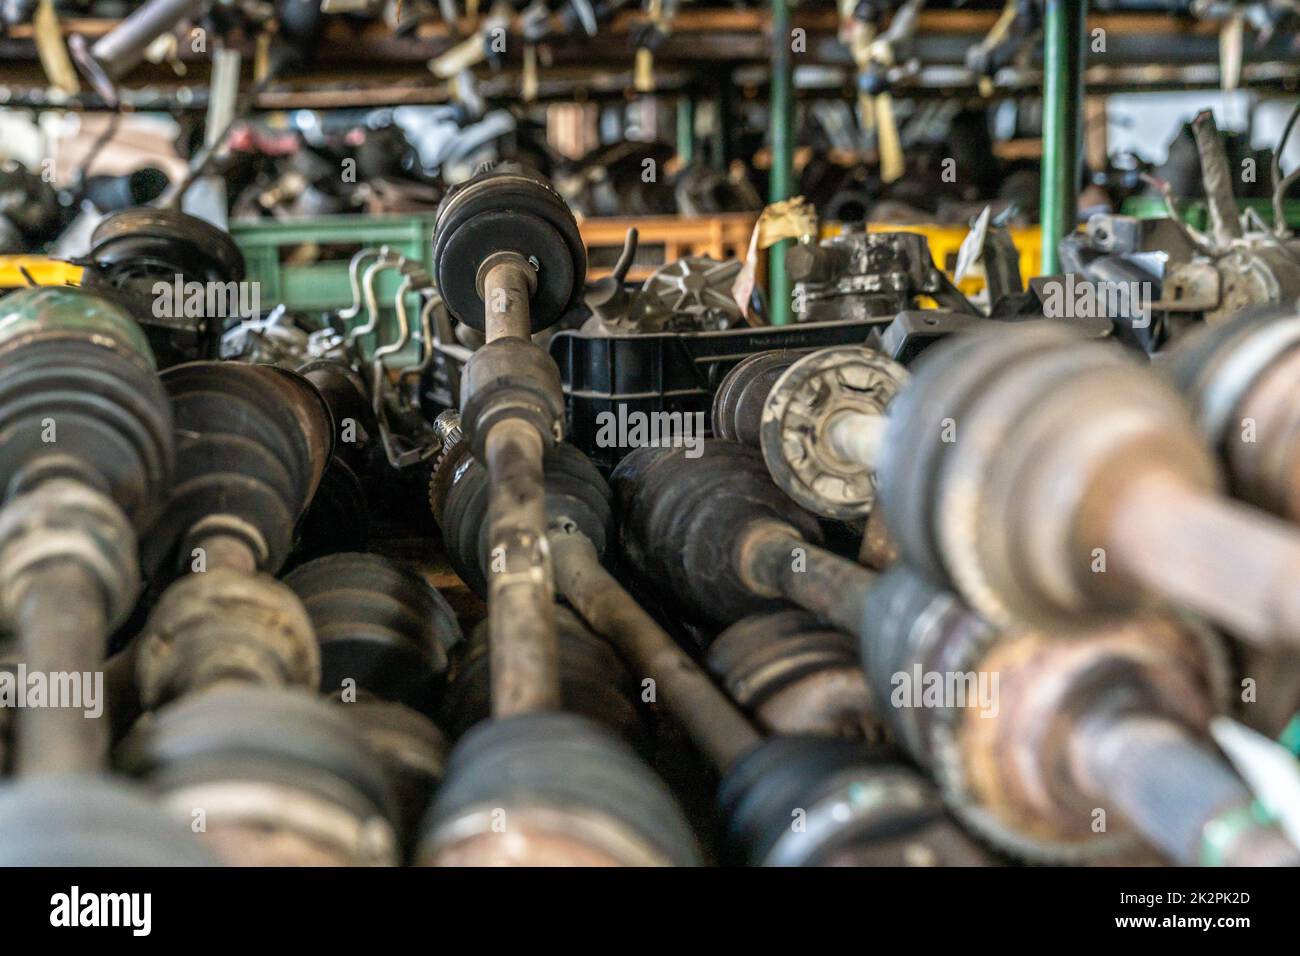 parts of dismantled cars at the car wreck Stock Photo